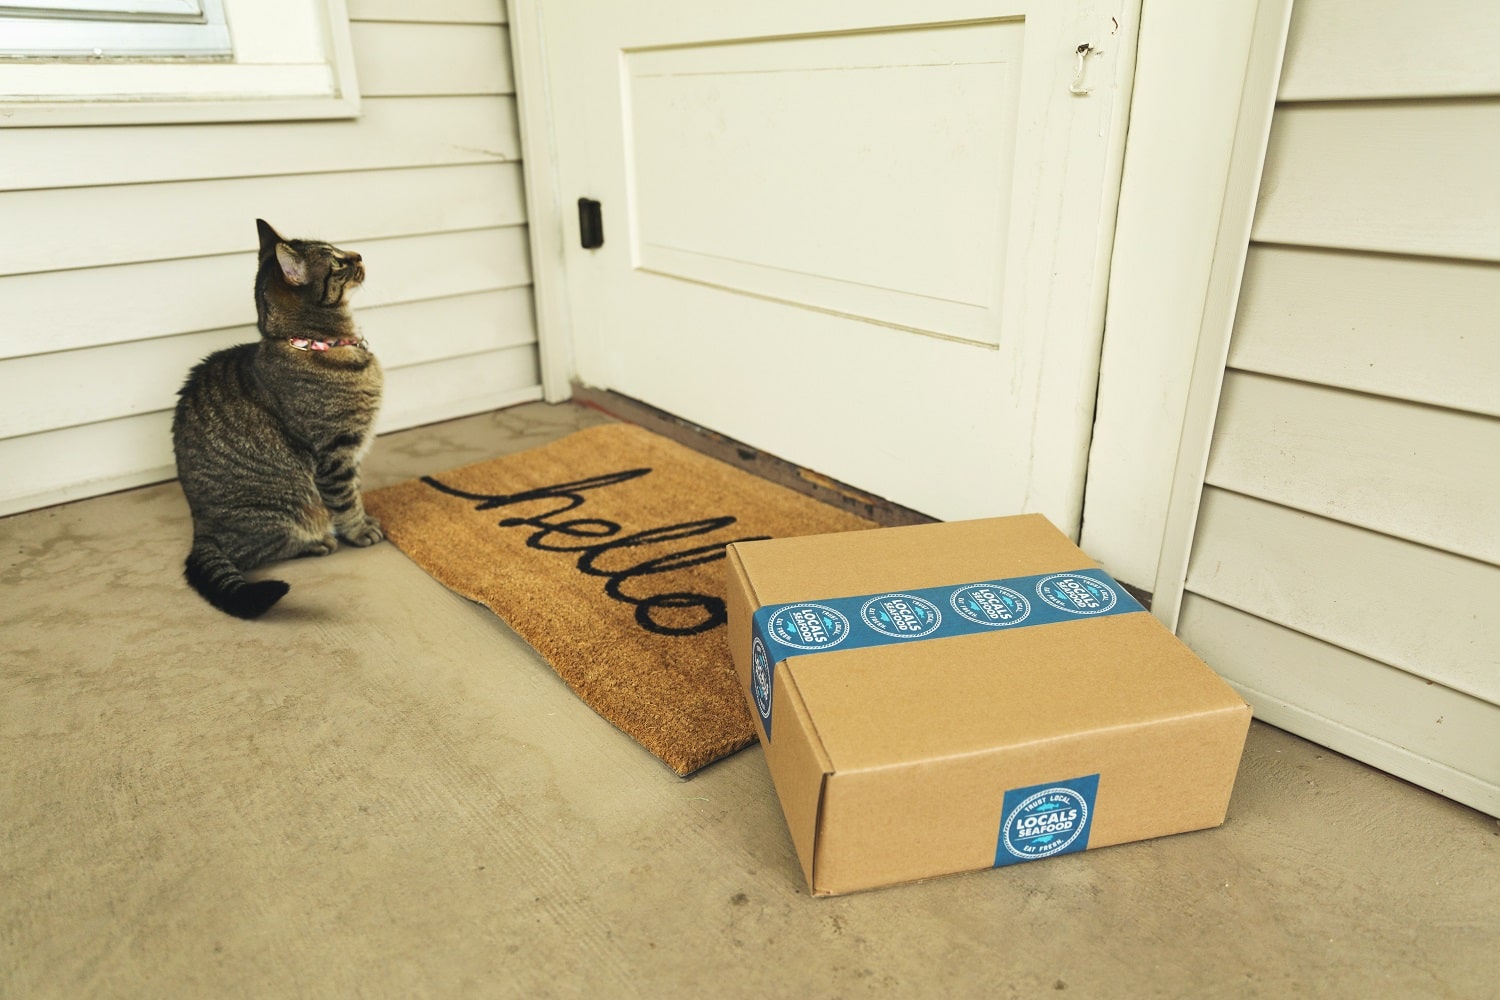 A cat sat on a doormat looking at a delivery box, representing Amazon fulfillment fees.